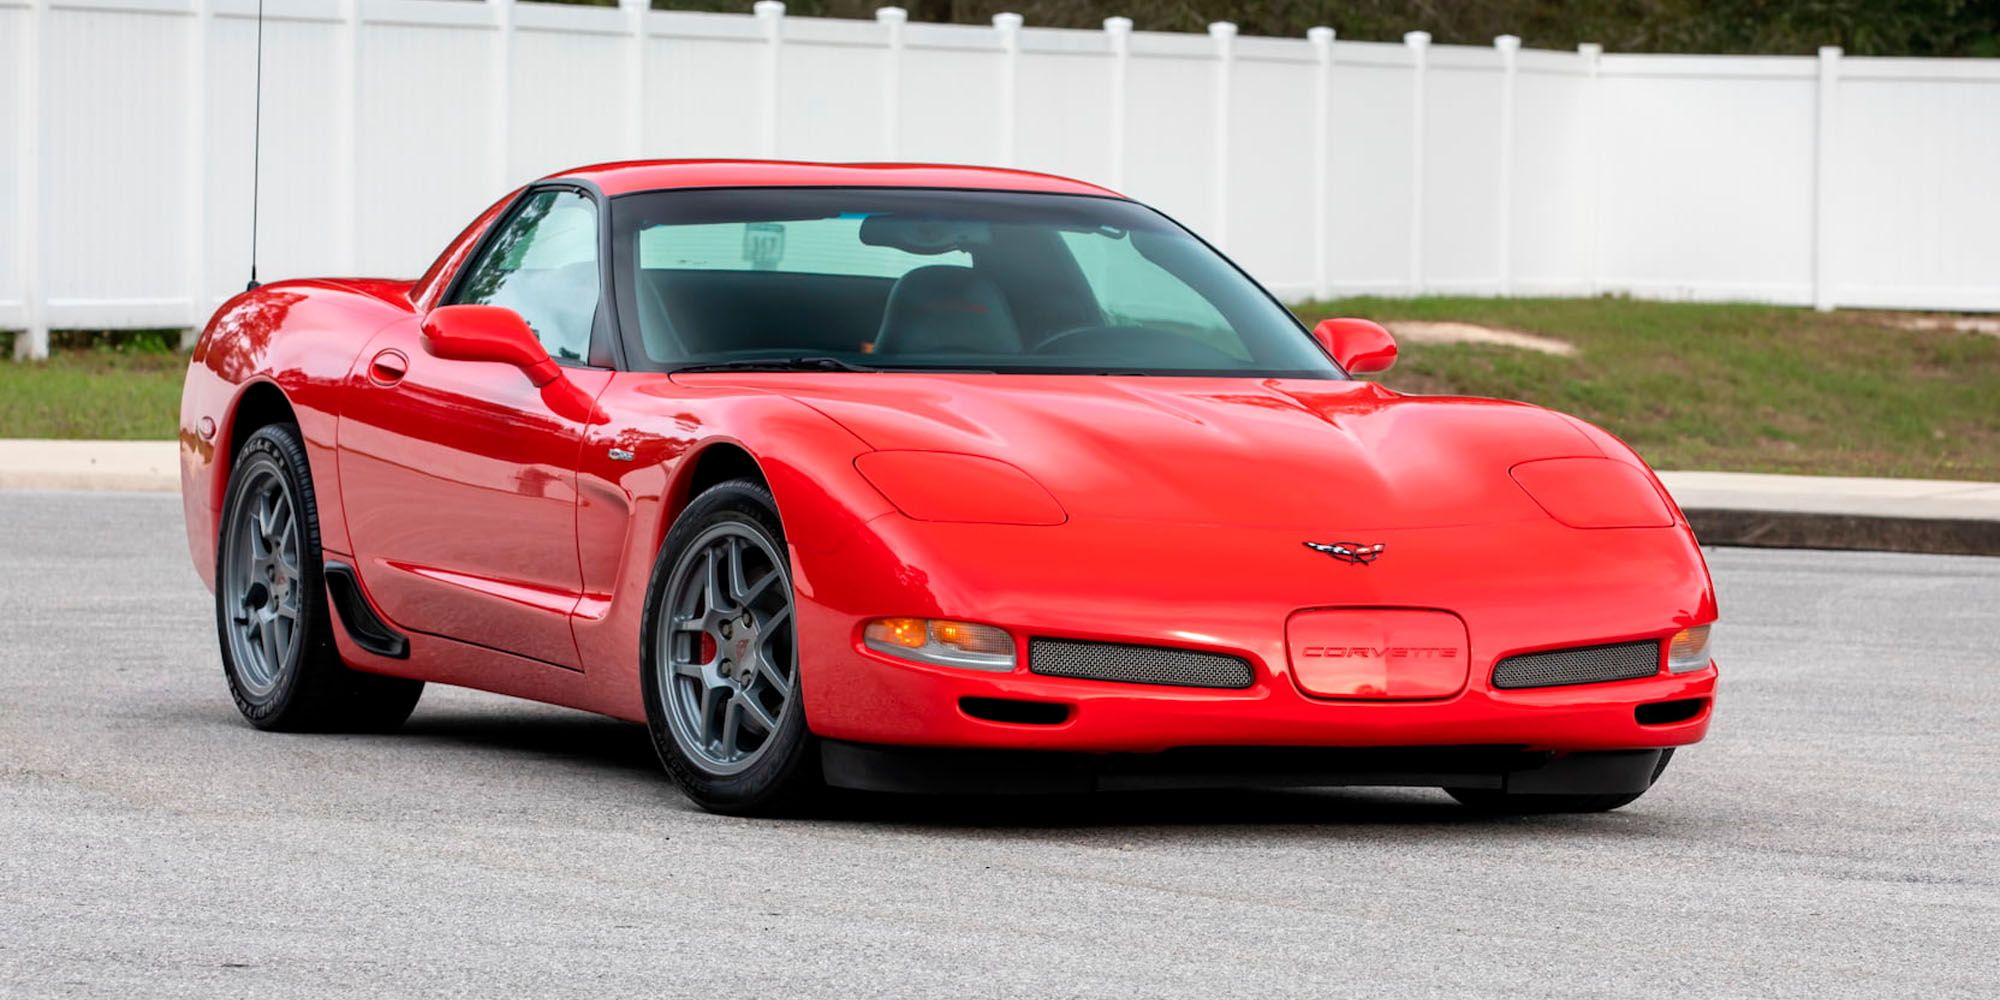 The front of the C5 Z06 Corvette sports car